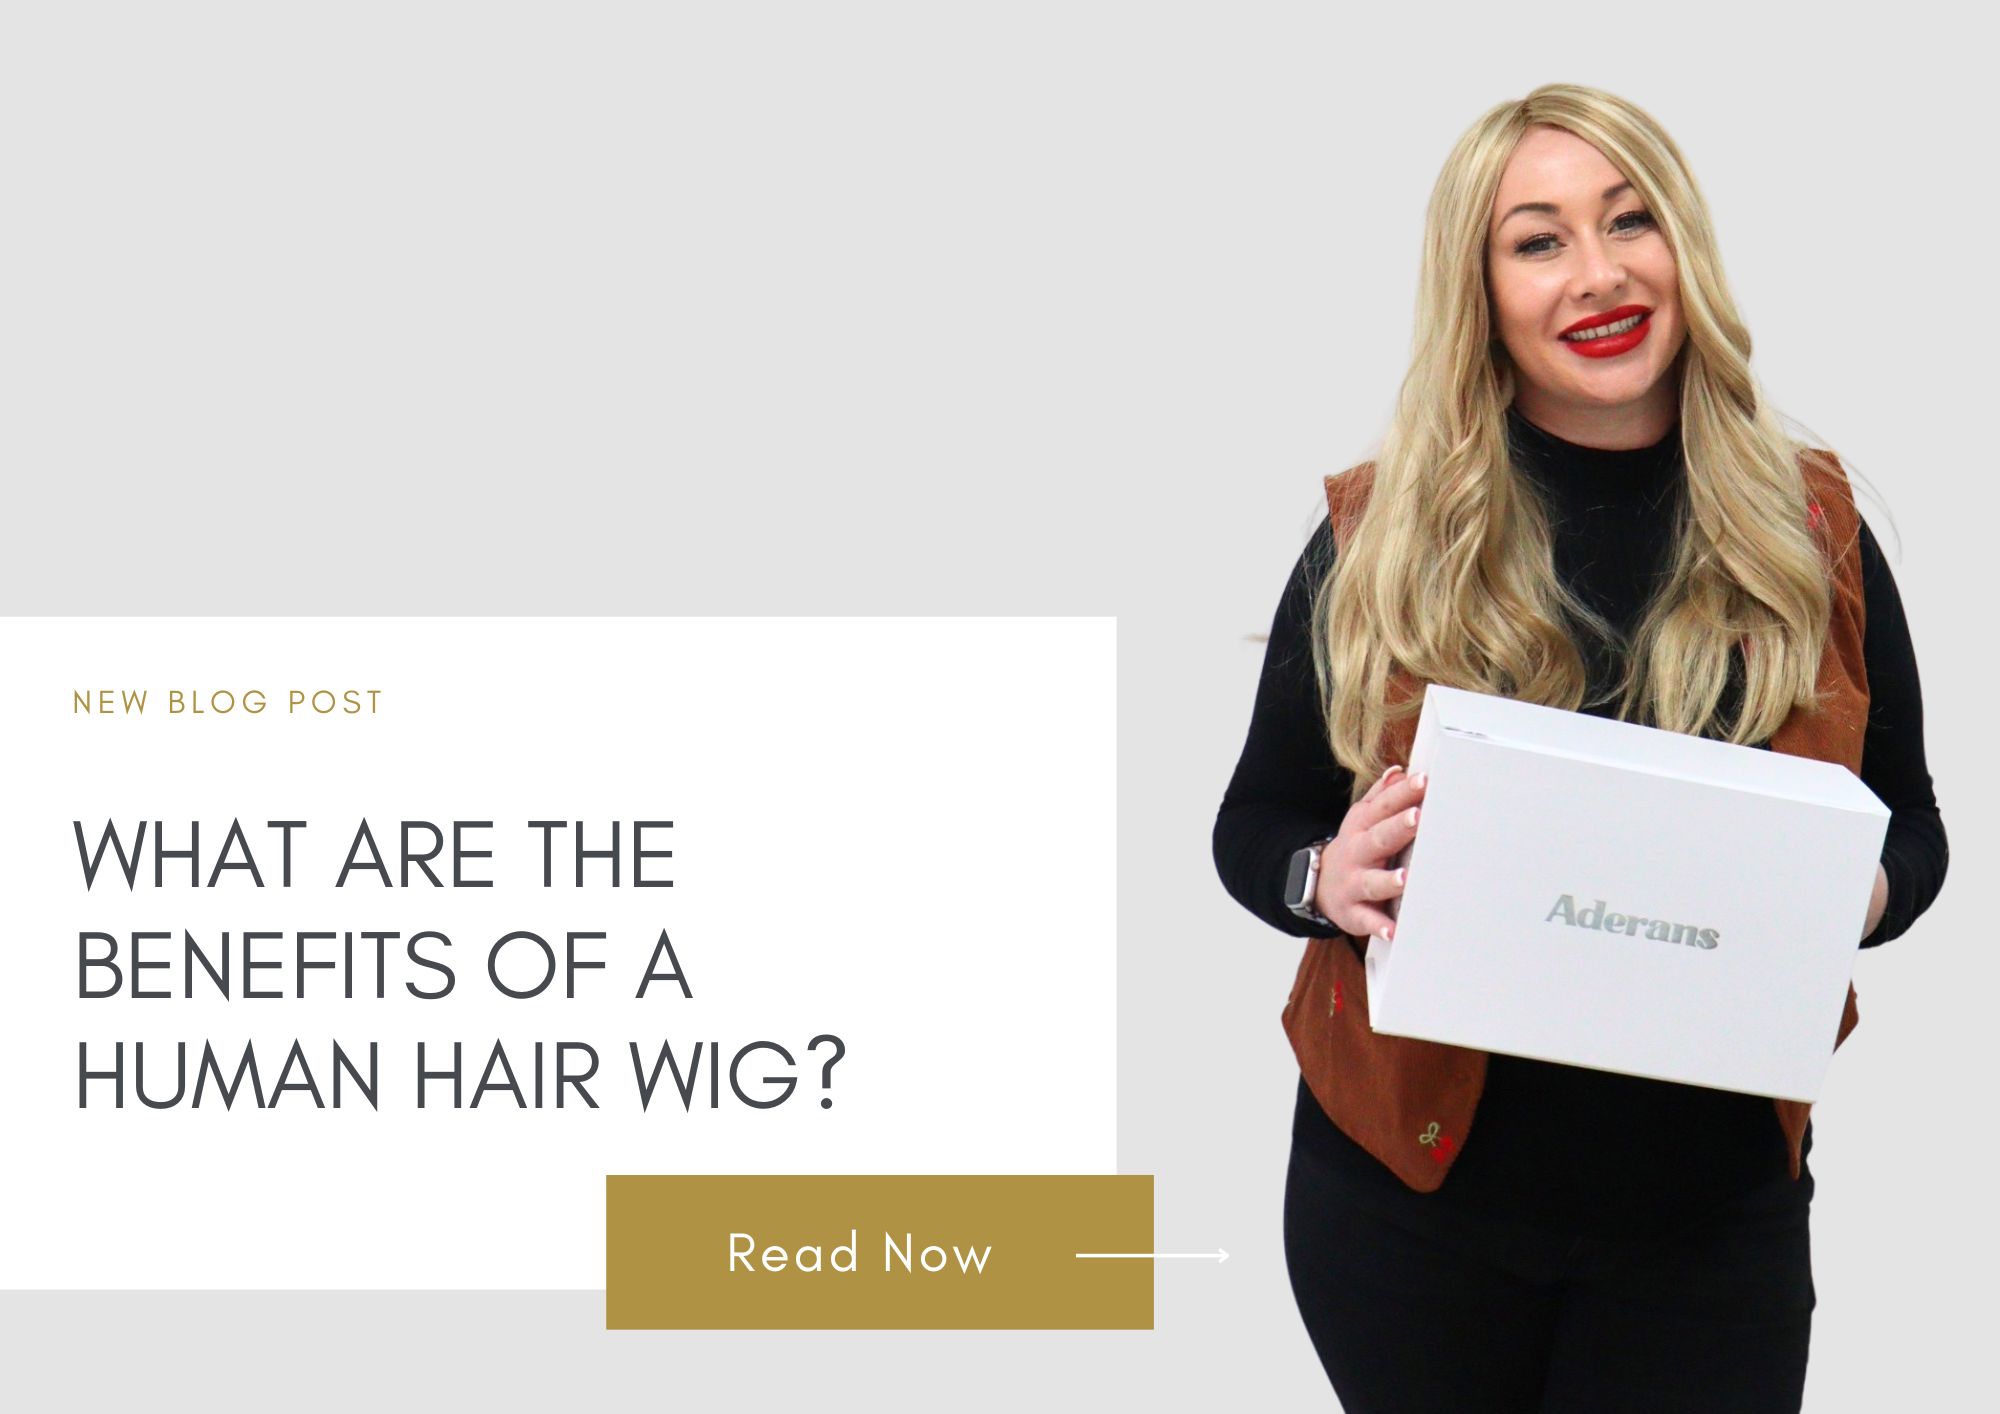 What are the benefits of a human hair wig?